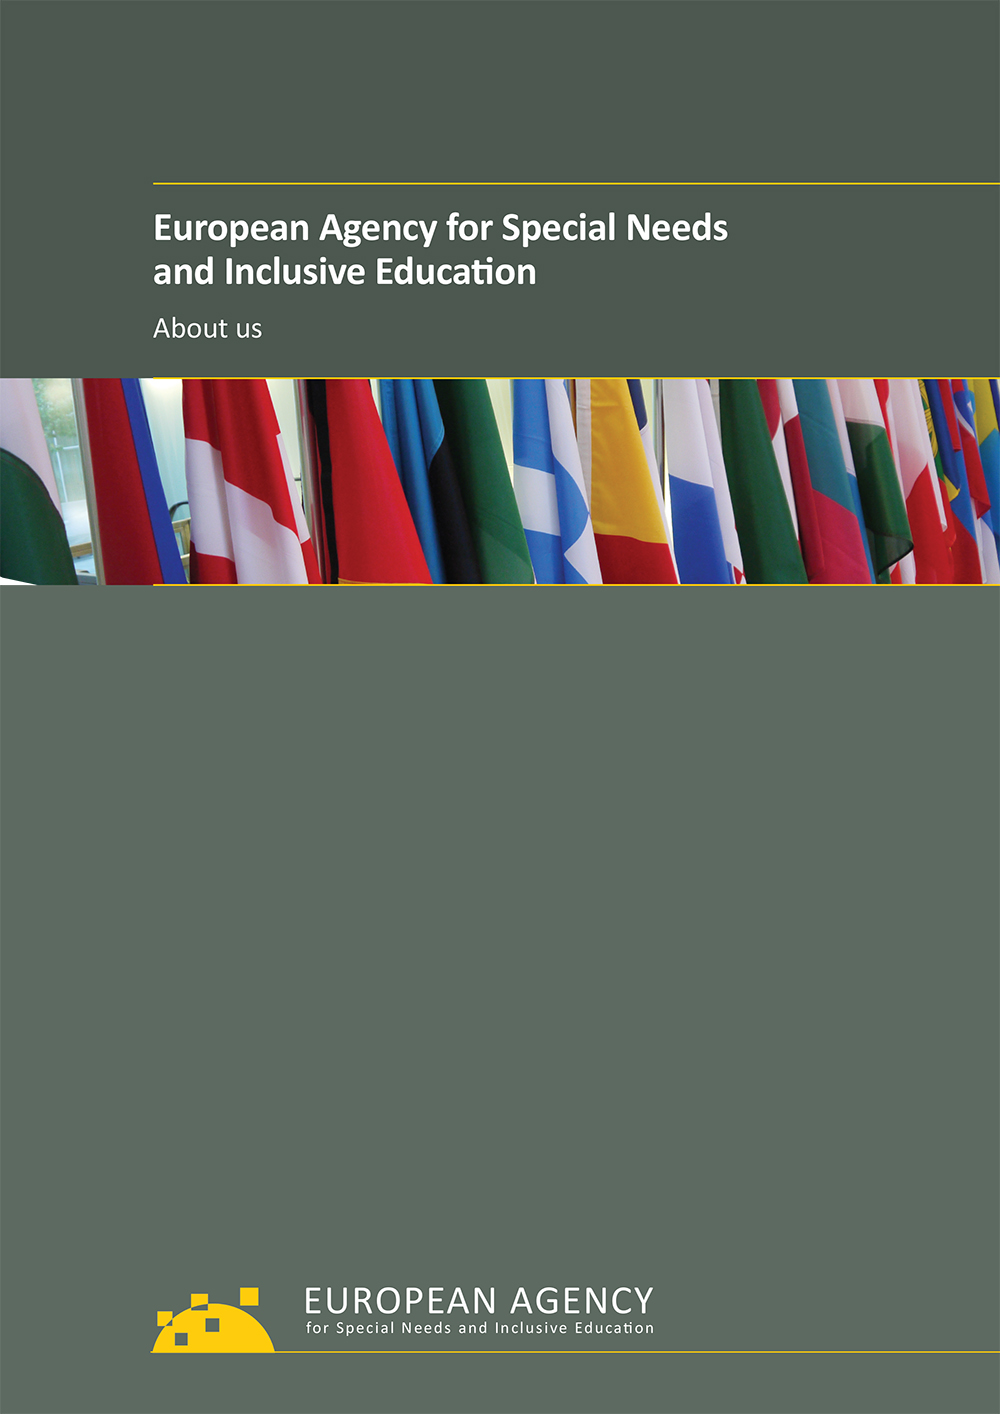 European Agency for Special Needs and Inclusive Education - About us